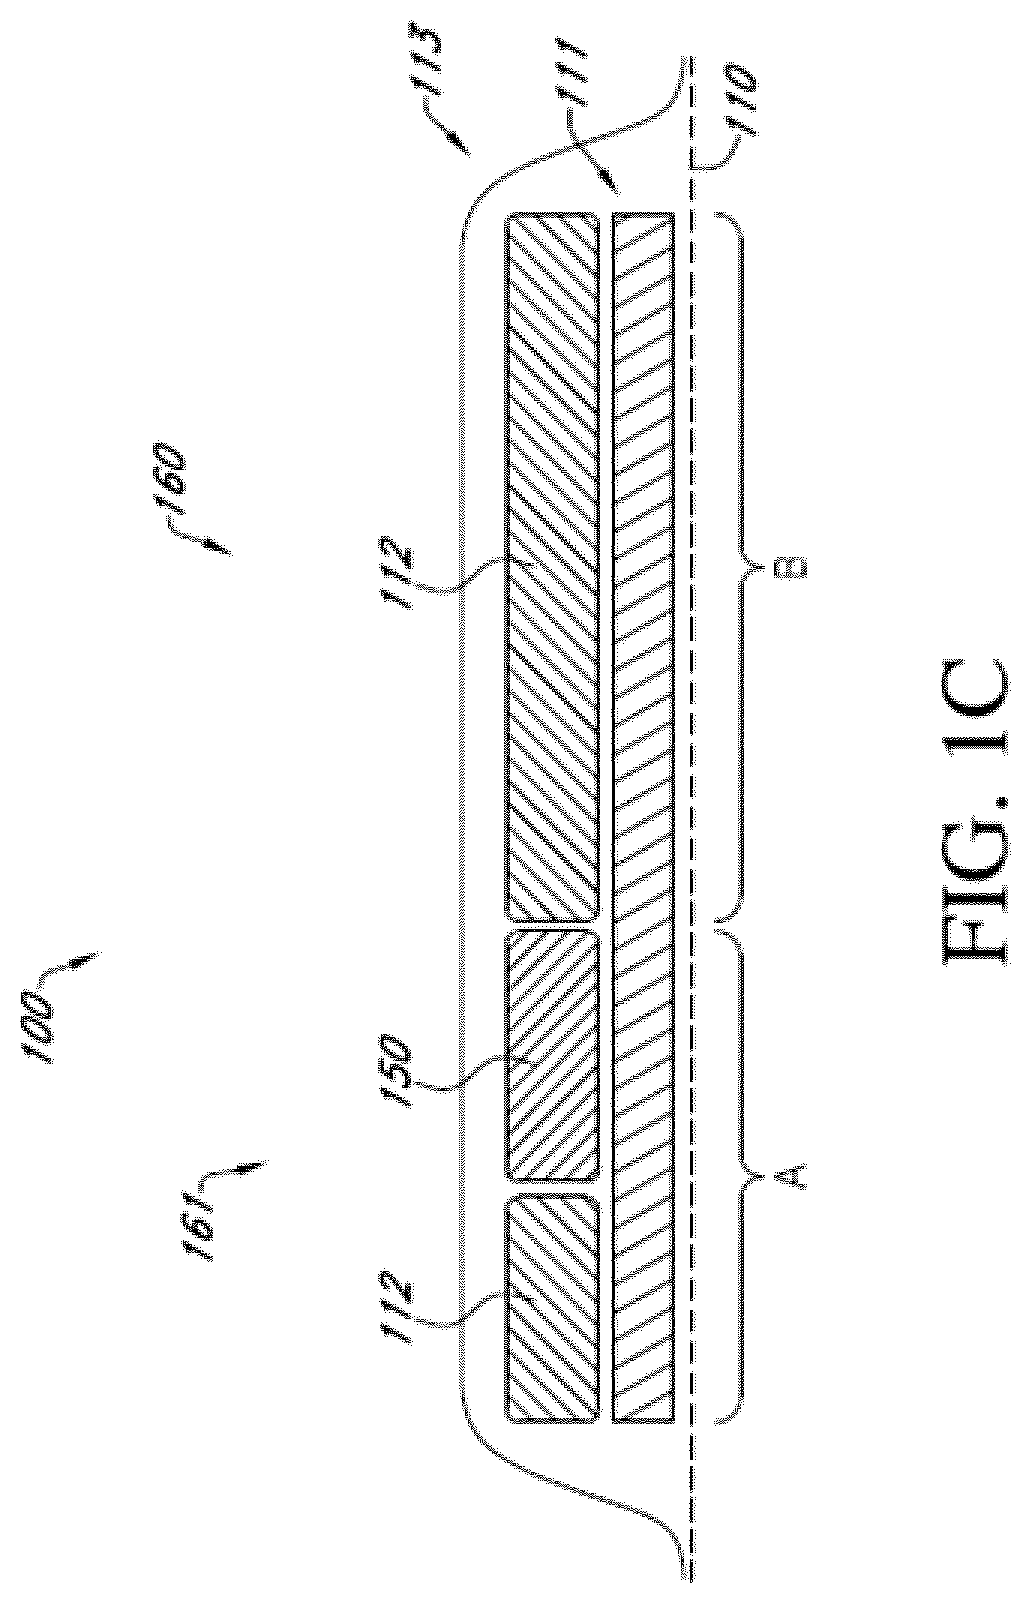 Safe operation of integrated negative pressure wound treatment apparatuses